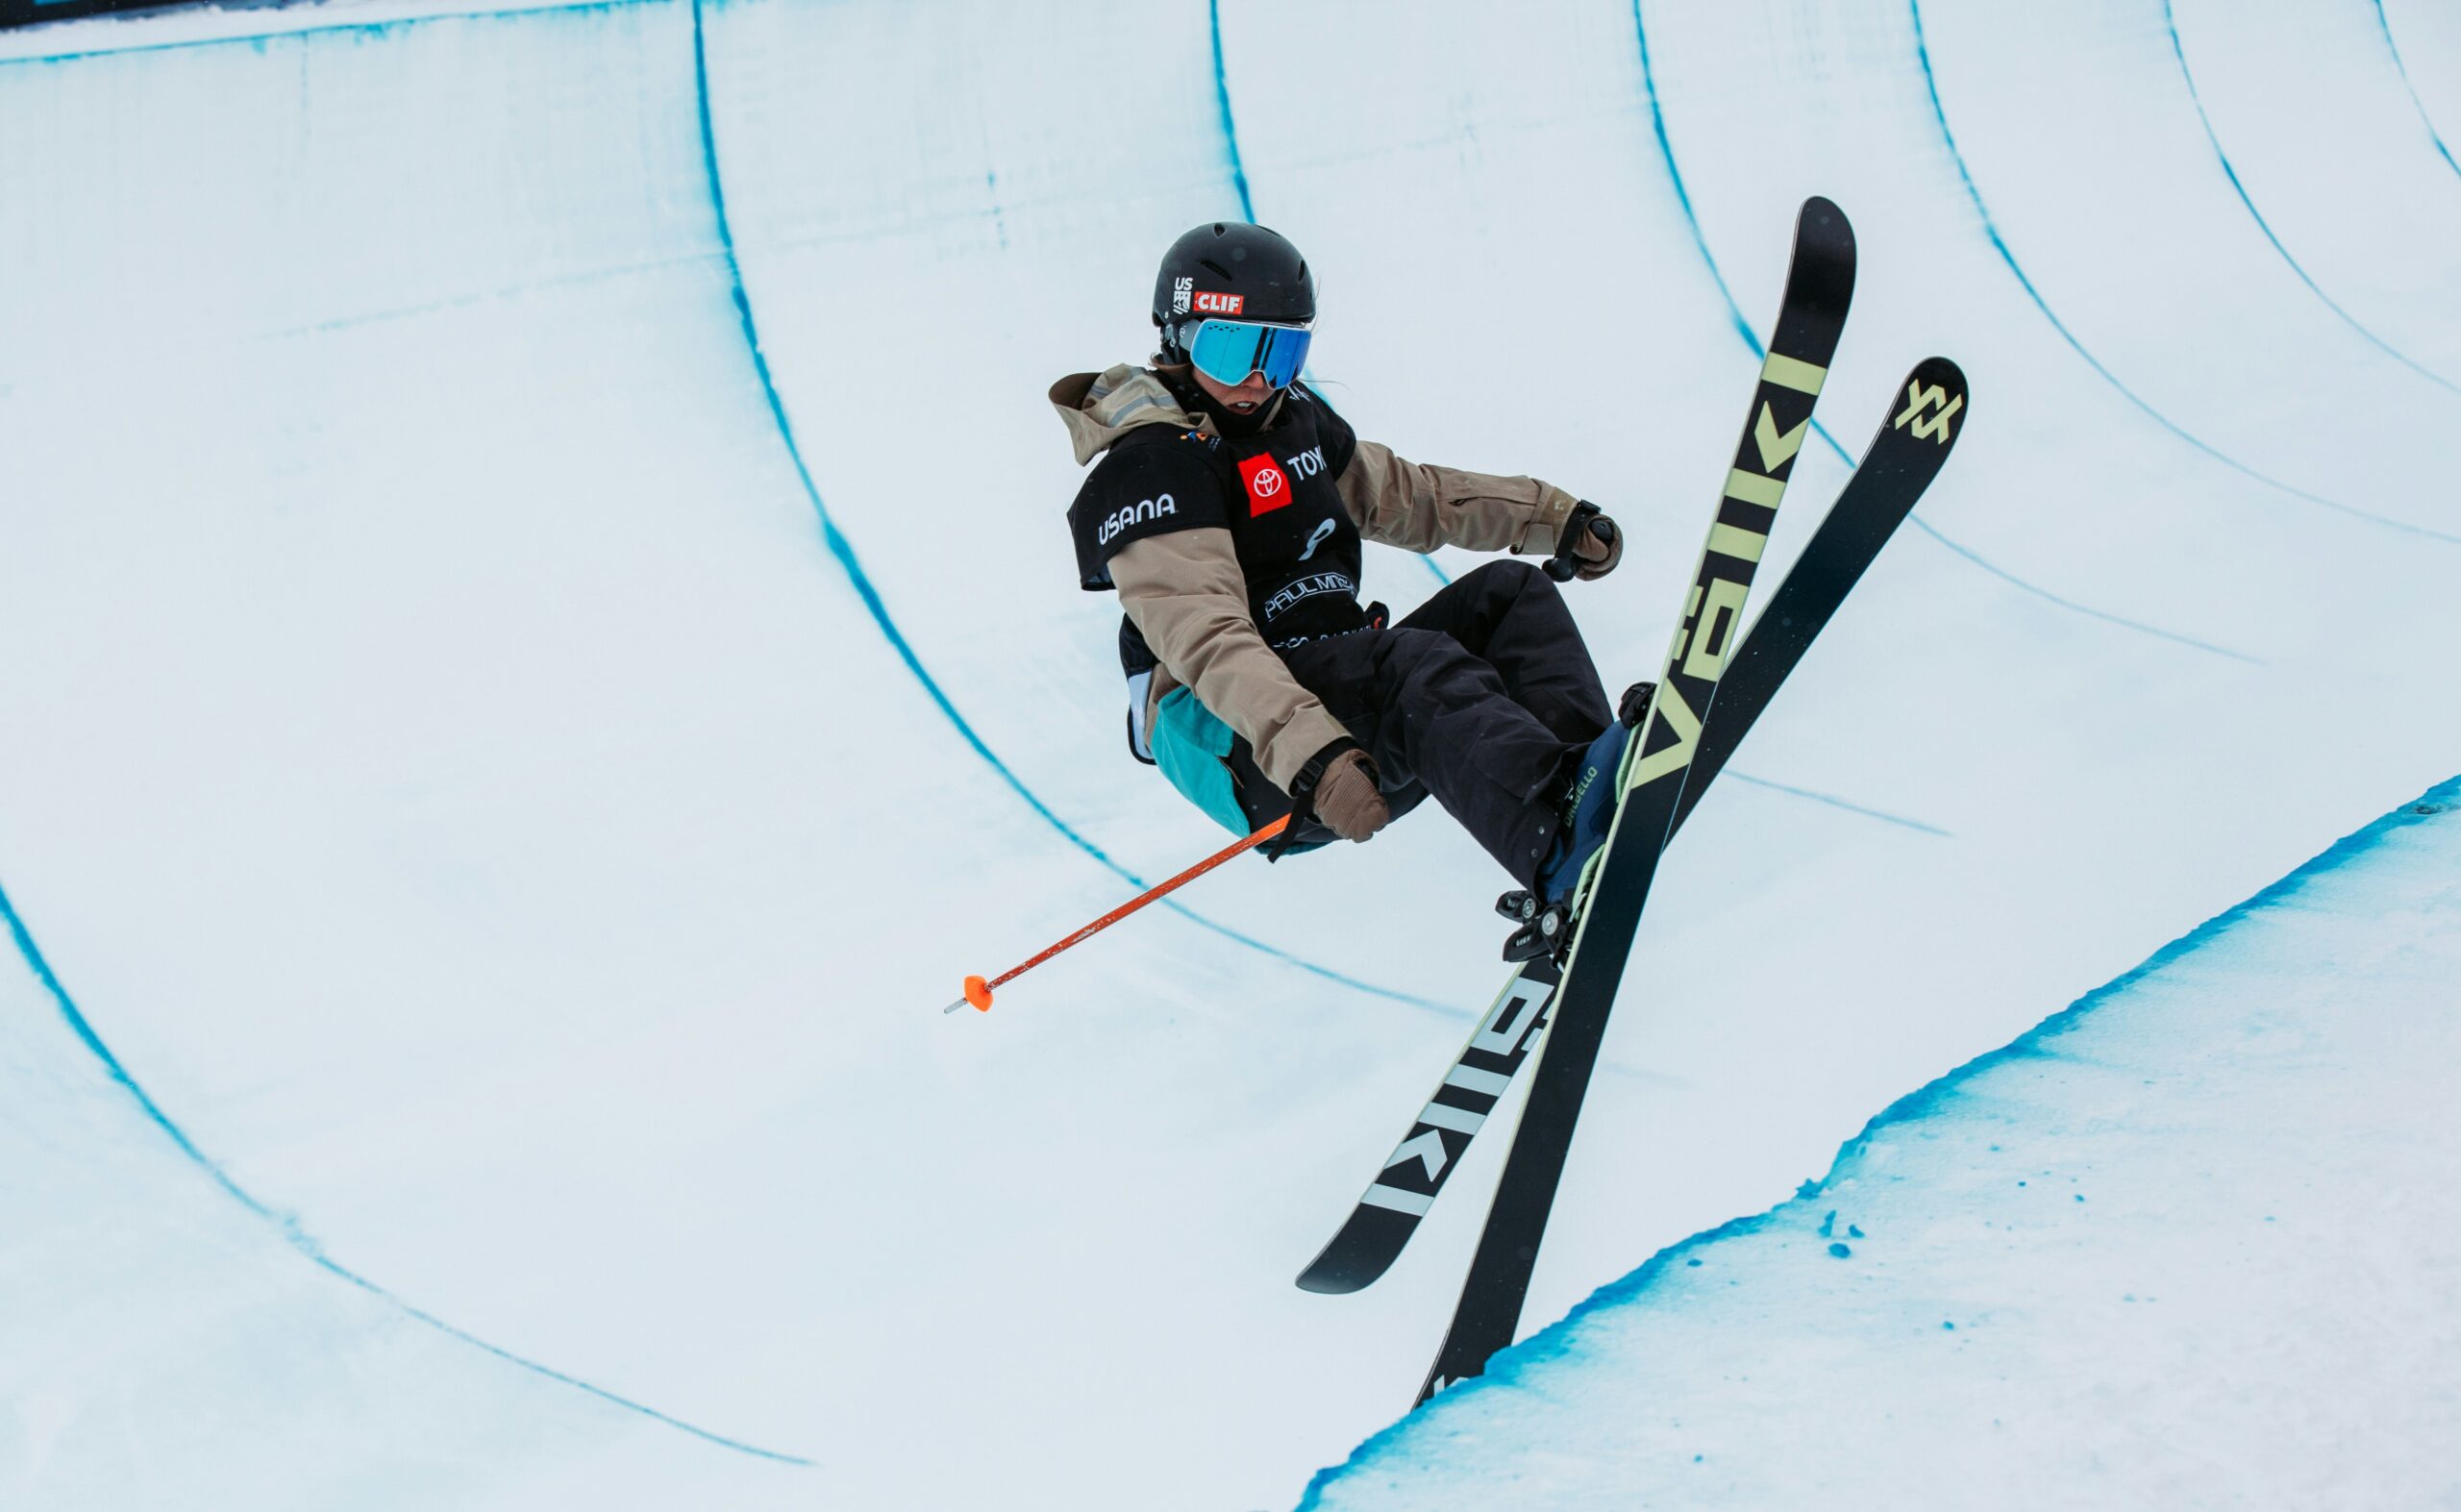 Different Types of Skiing. Freestyle Skiing. Photo by Patrick T'Kindt on Unsplash